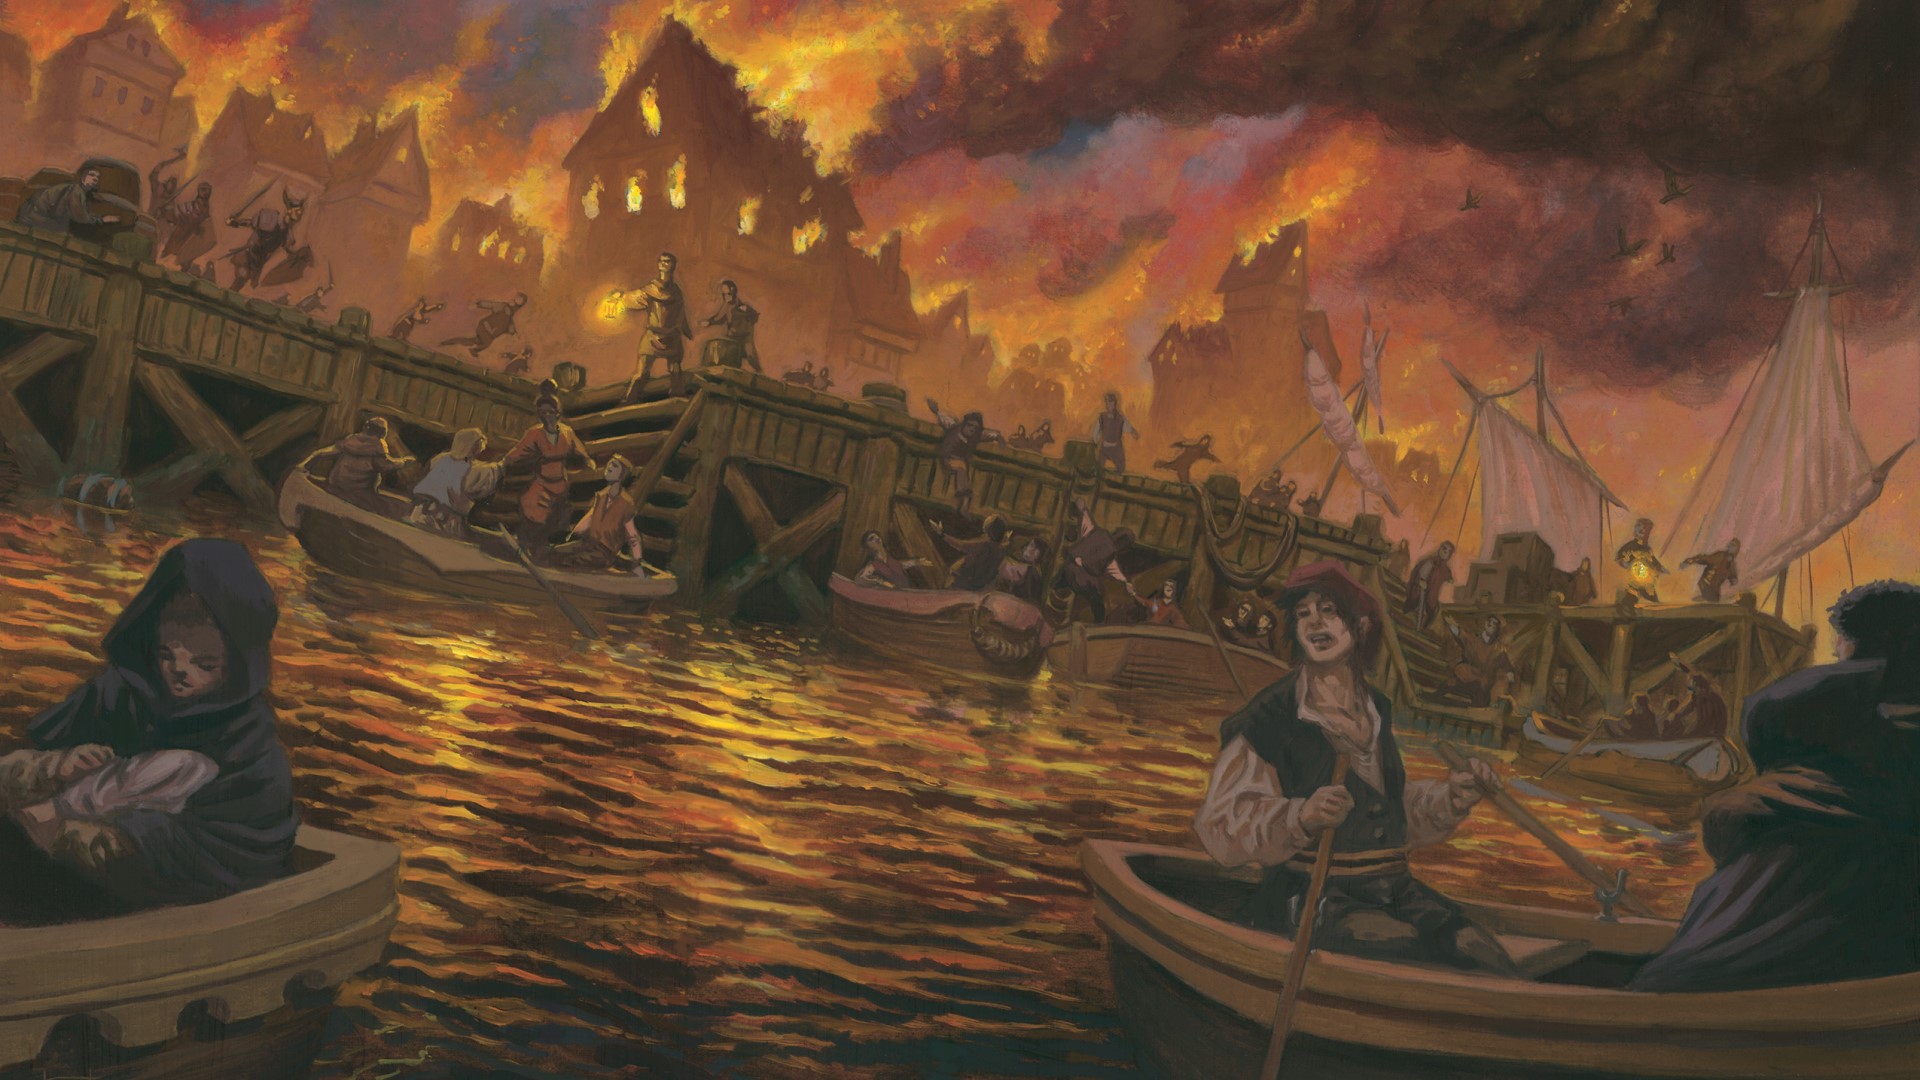 DnD Dragonlance: Shadow of the Dragon Queen review - Wizards of the Coast art of villagers evacuating Vogler by boat